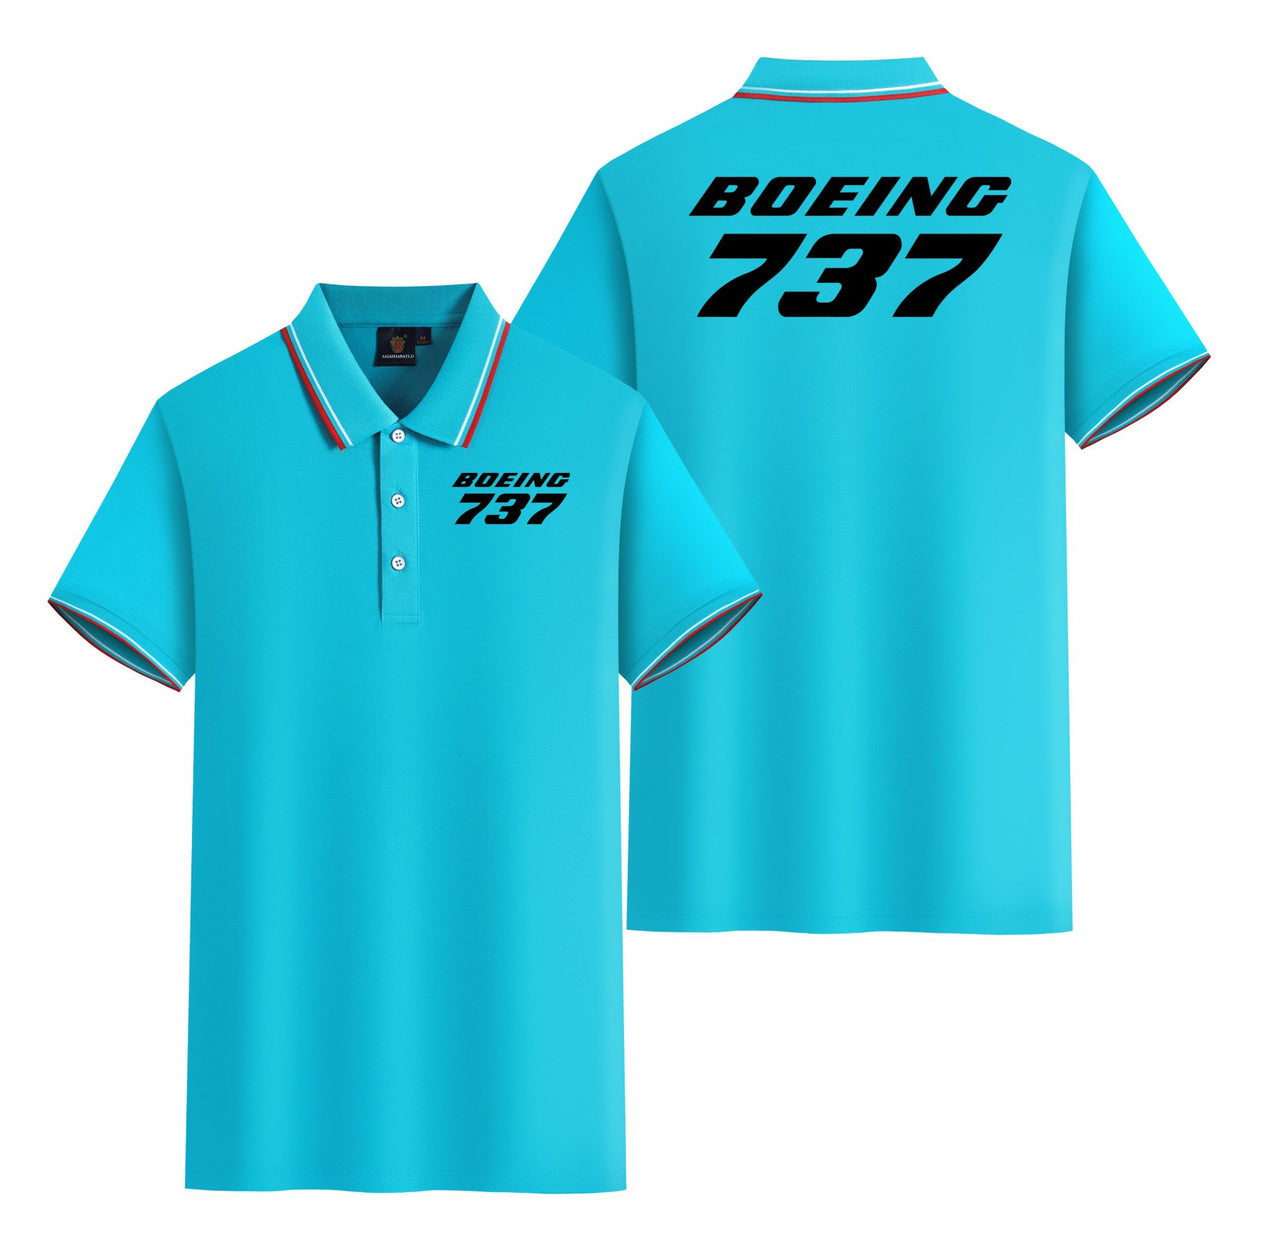 Boeing 737 & Text Designed Stylish Polo T-Shirts (Double-Side)